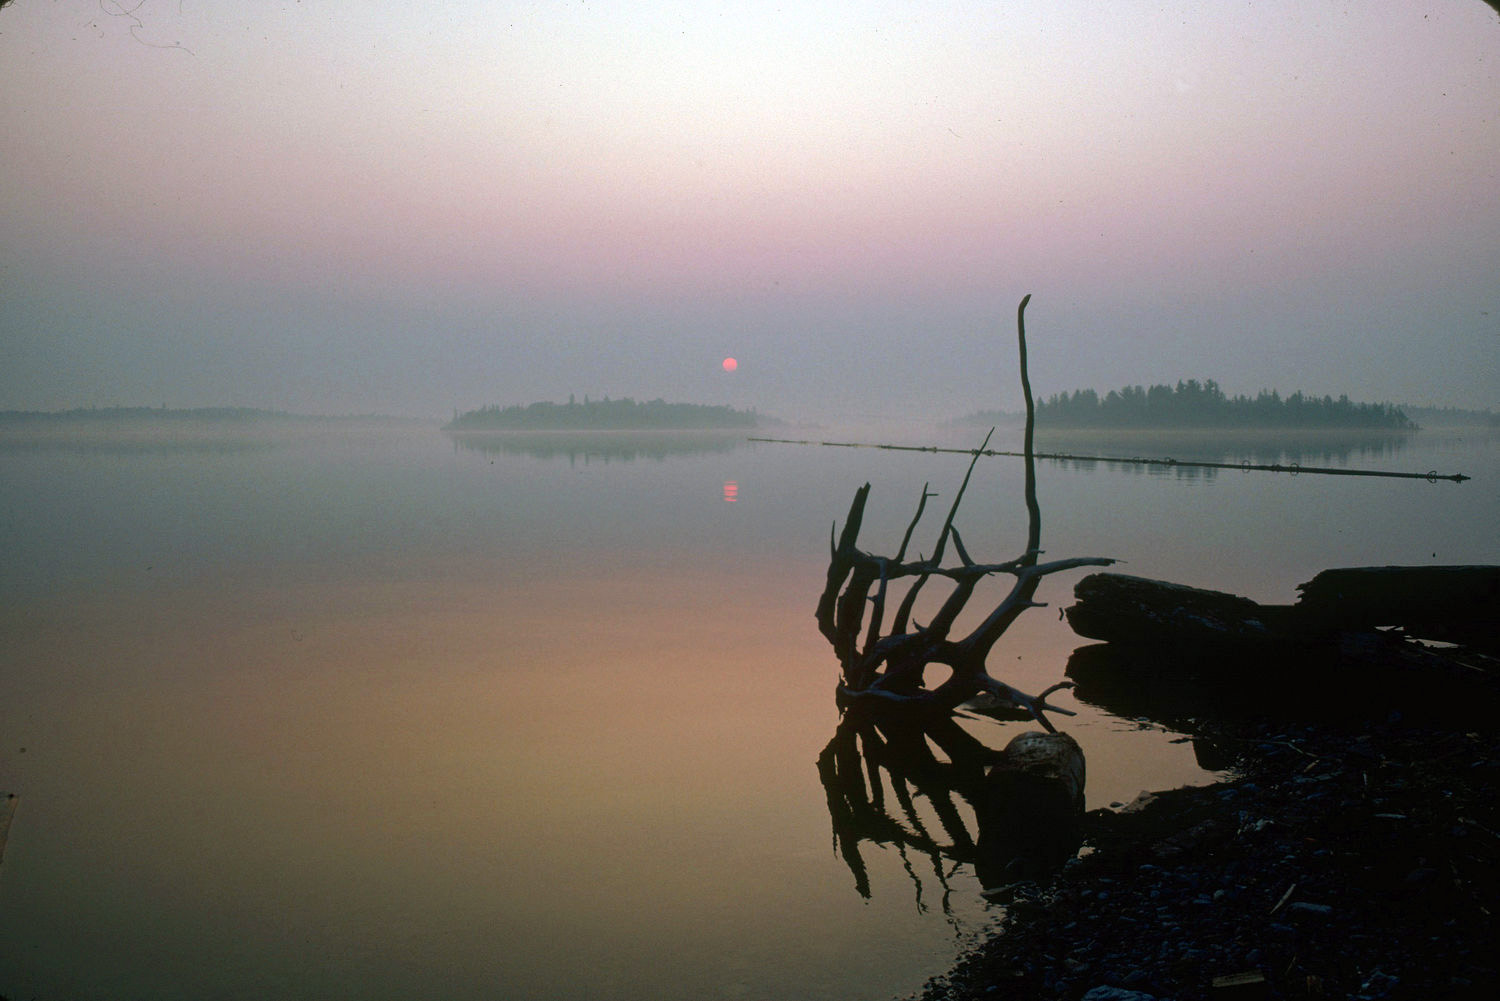 Colour photograph taken at dusk of a view of a lake with islands and floating pieces of wood.